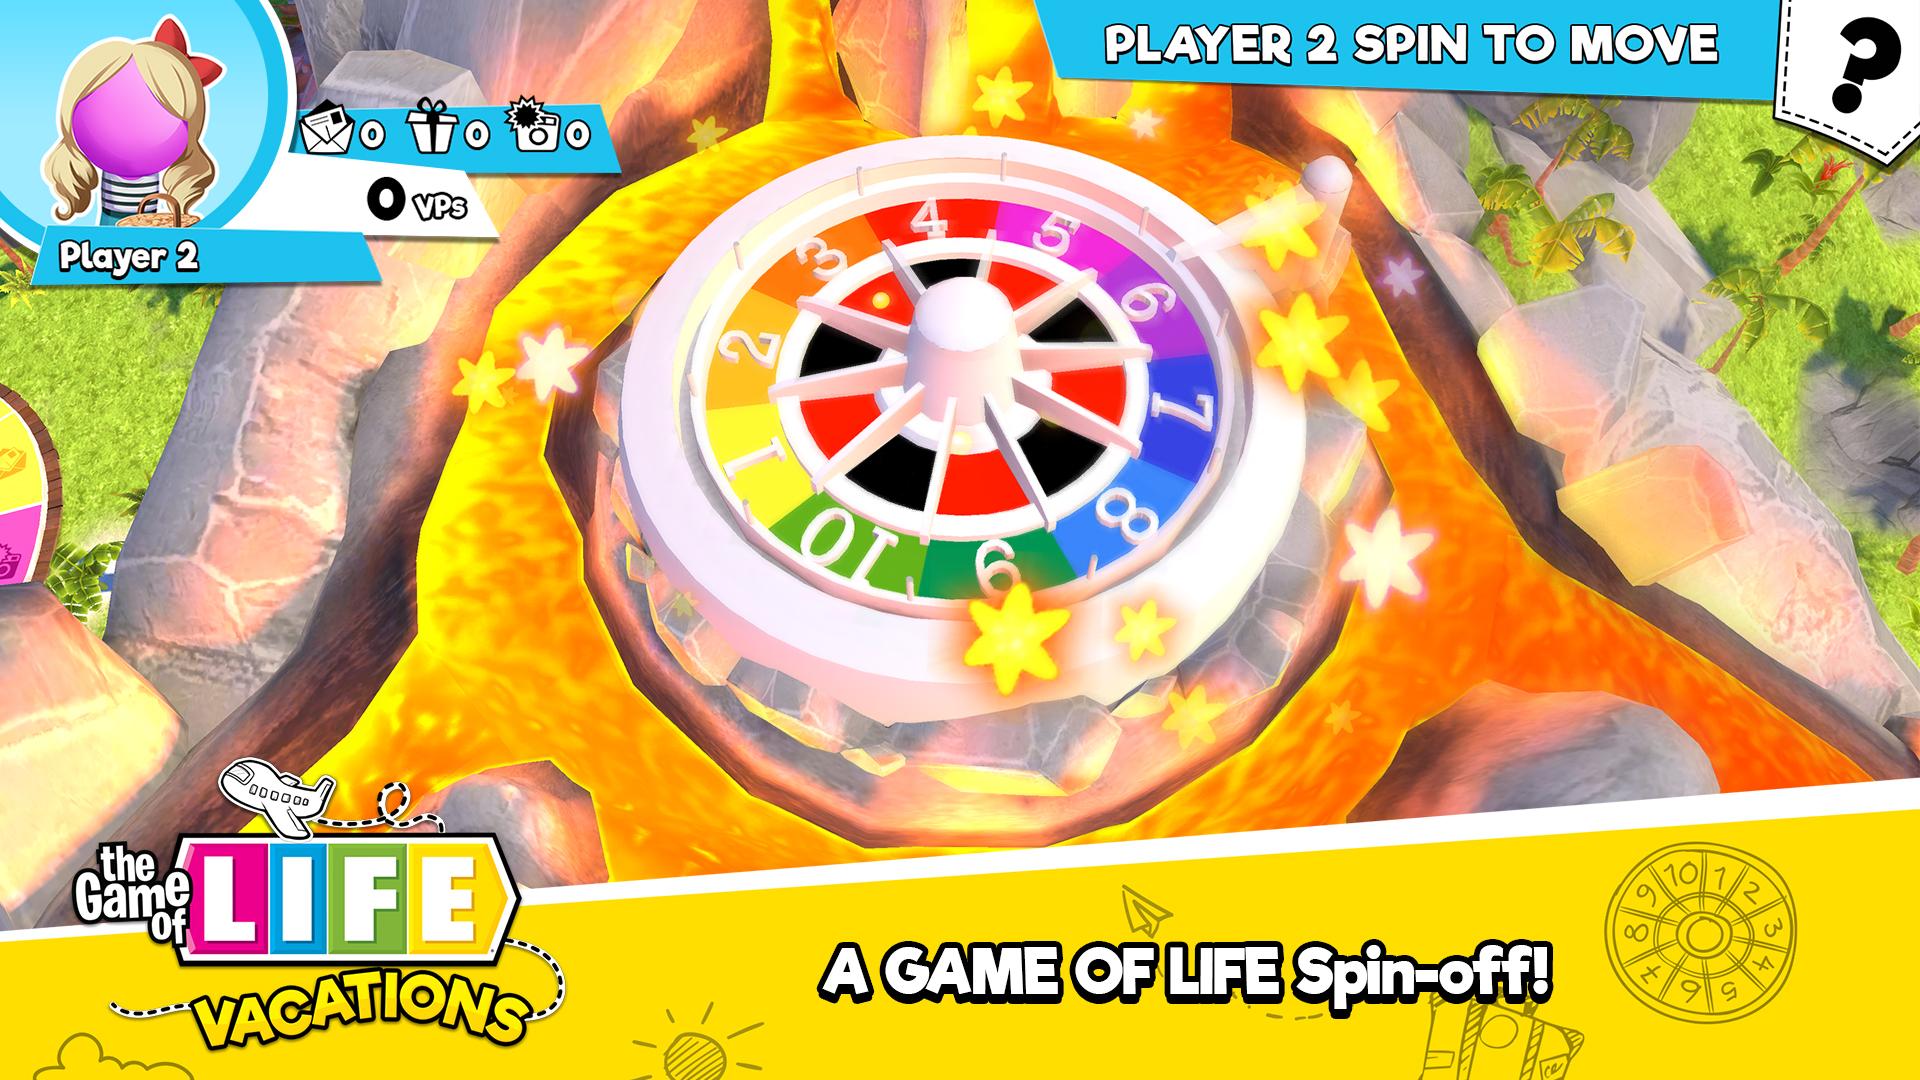 The Game of Life: Vacations